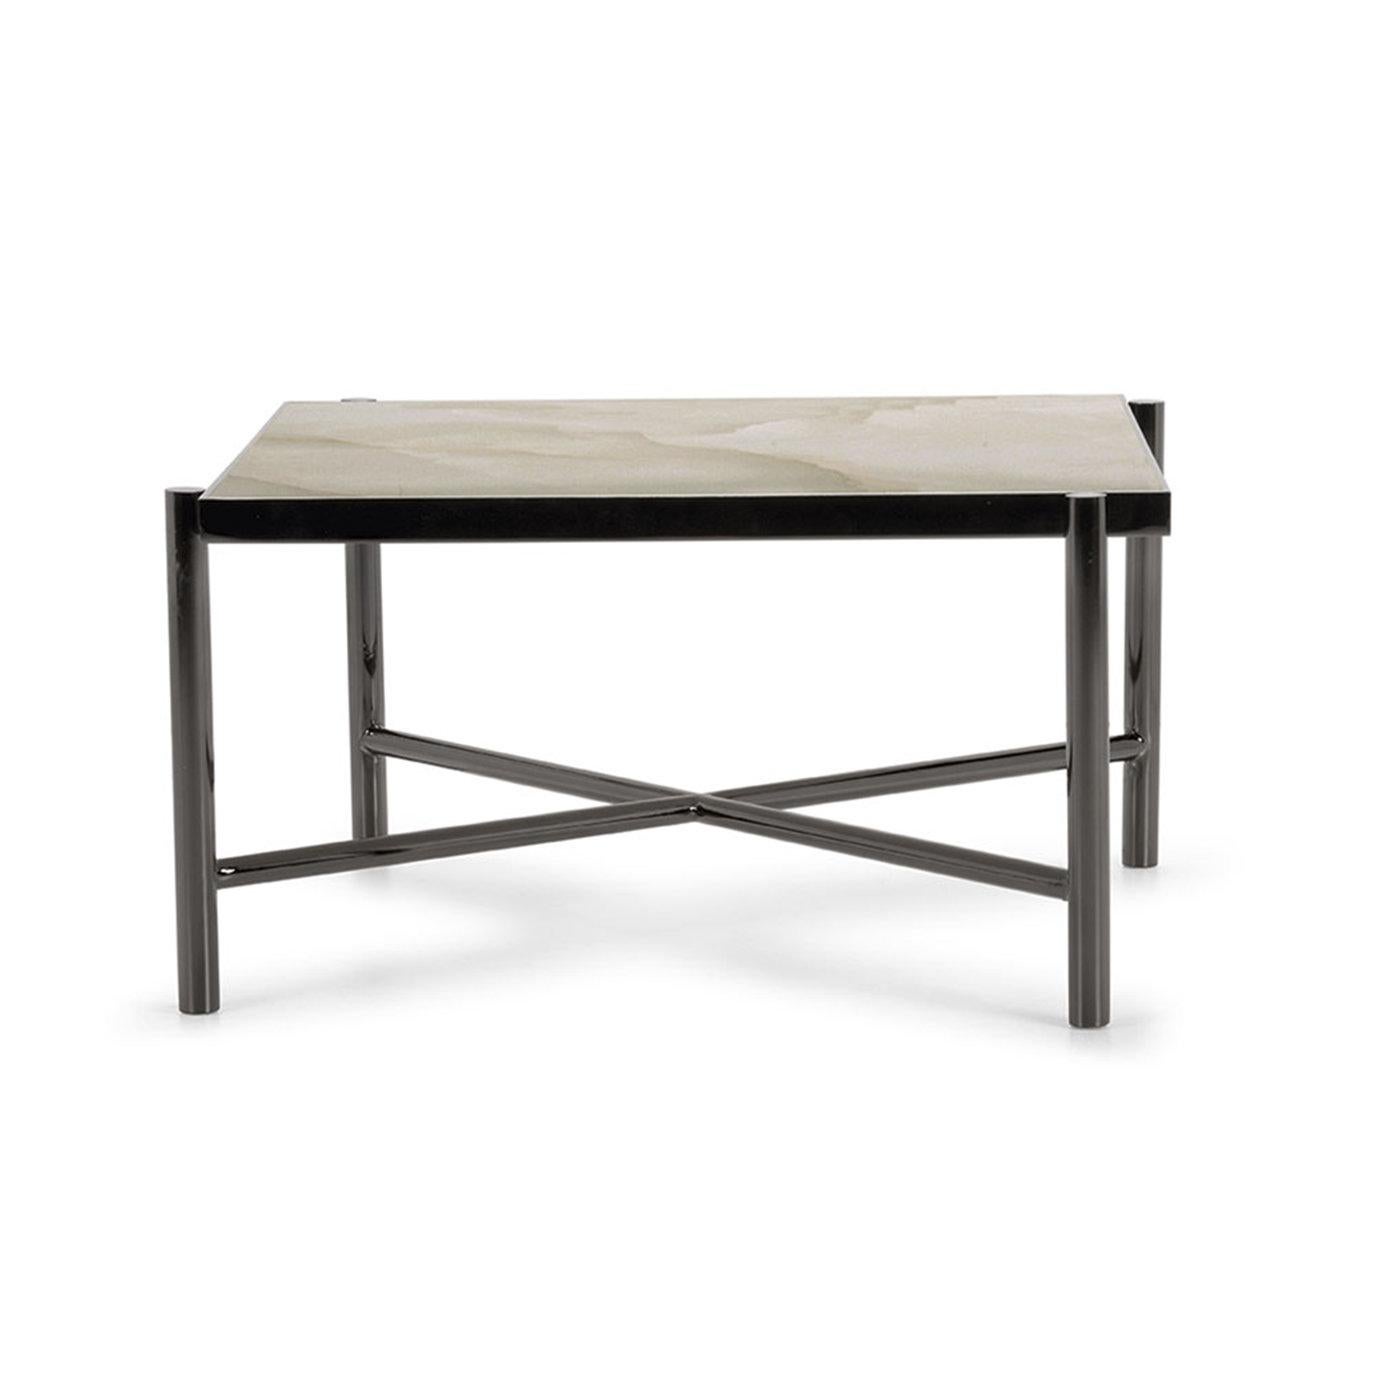 Rhea, Titaness and mother of Zeus in Greek mythology, inspired the mismatched yet harmonious lines defining this sophisticated coffee table whose color palette conveys a sense of simple flair. Entirely handcrafted, the sleek structure in